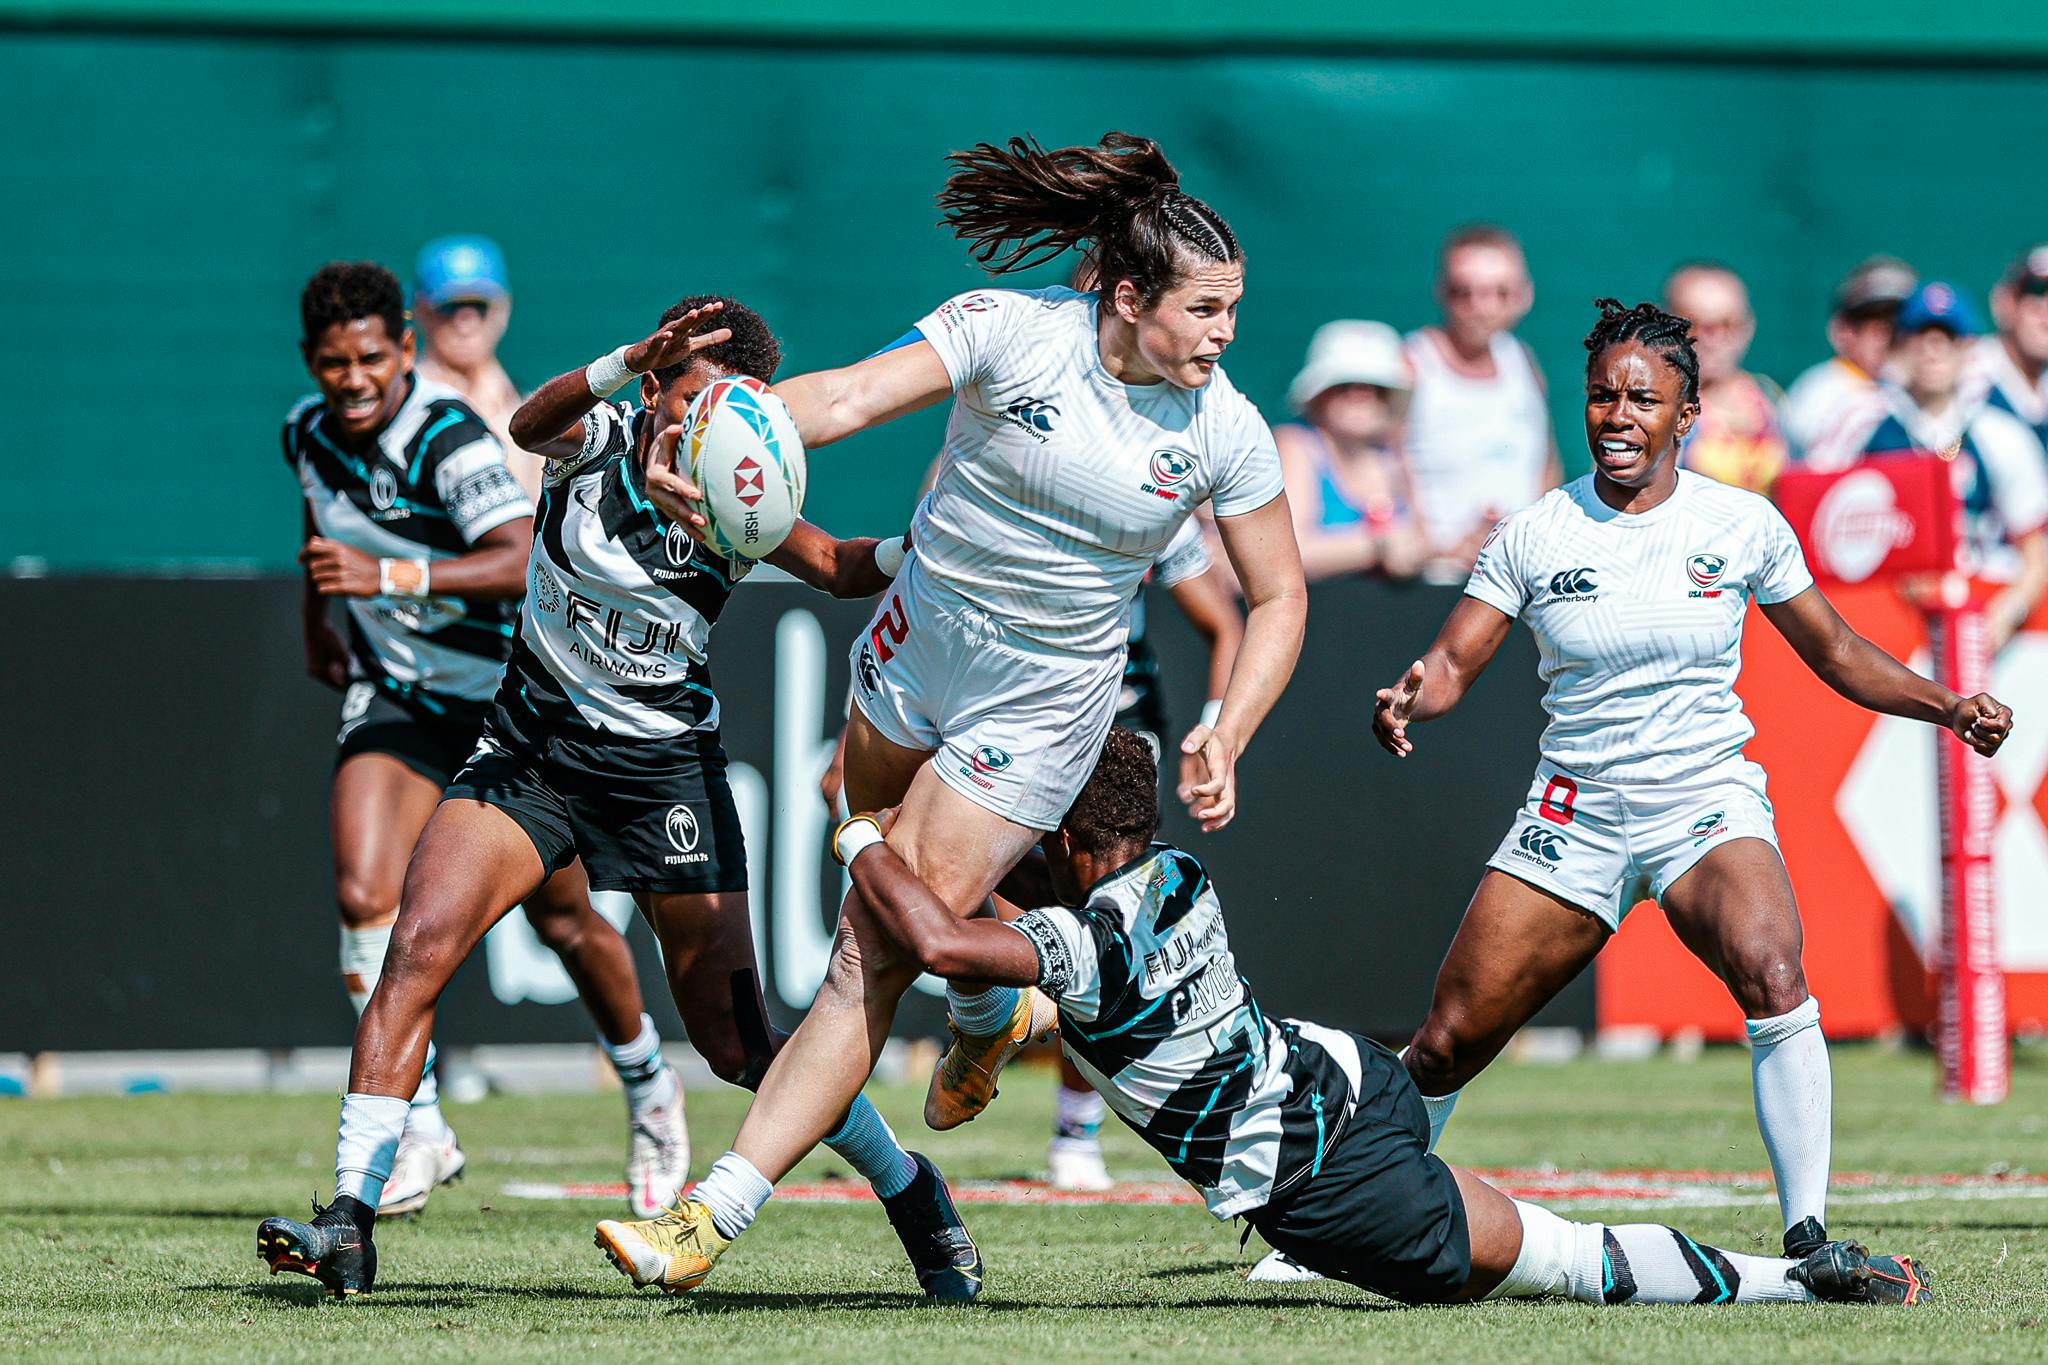 on day one of the Dubai Emirates Airline Rugby Sevens 2021 women's competition on 3 December, 2021. Photo credit: Mike Lee - KLC fotos for World Rugby